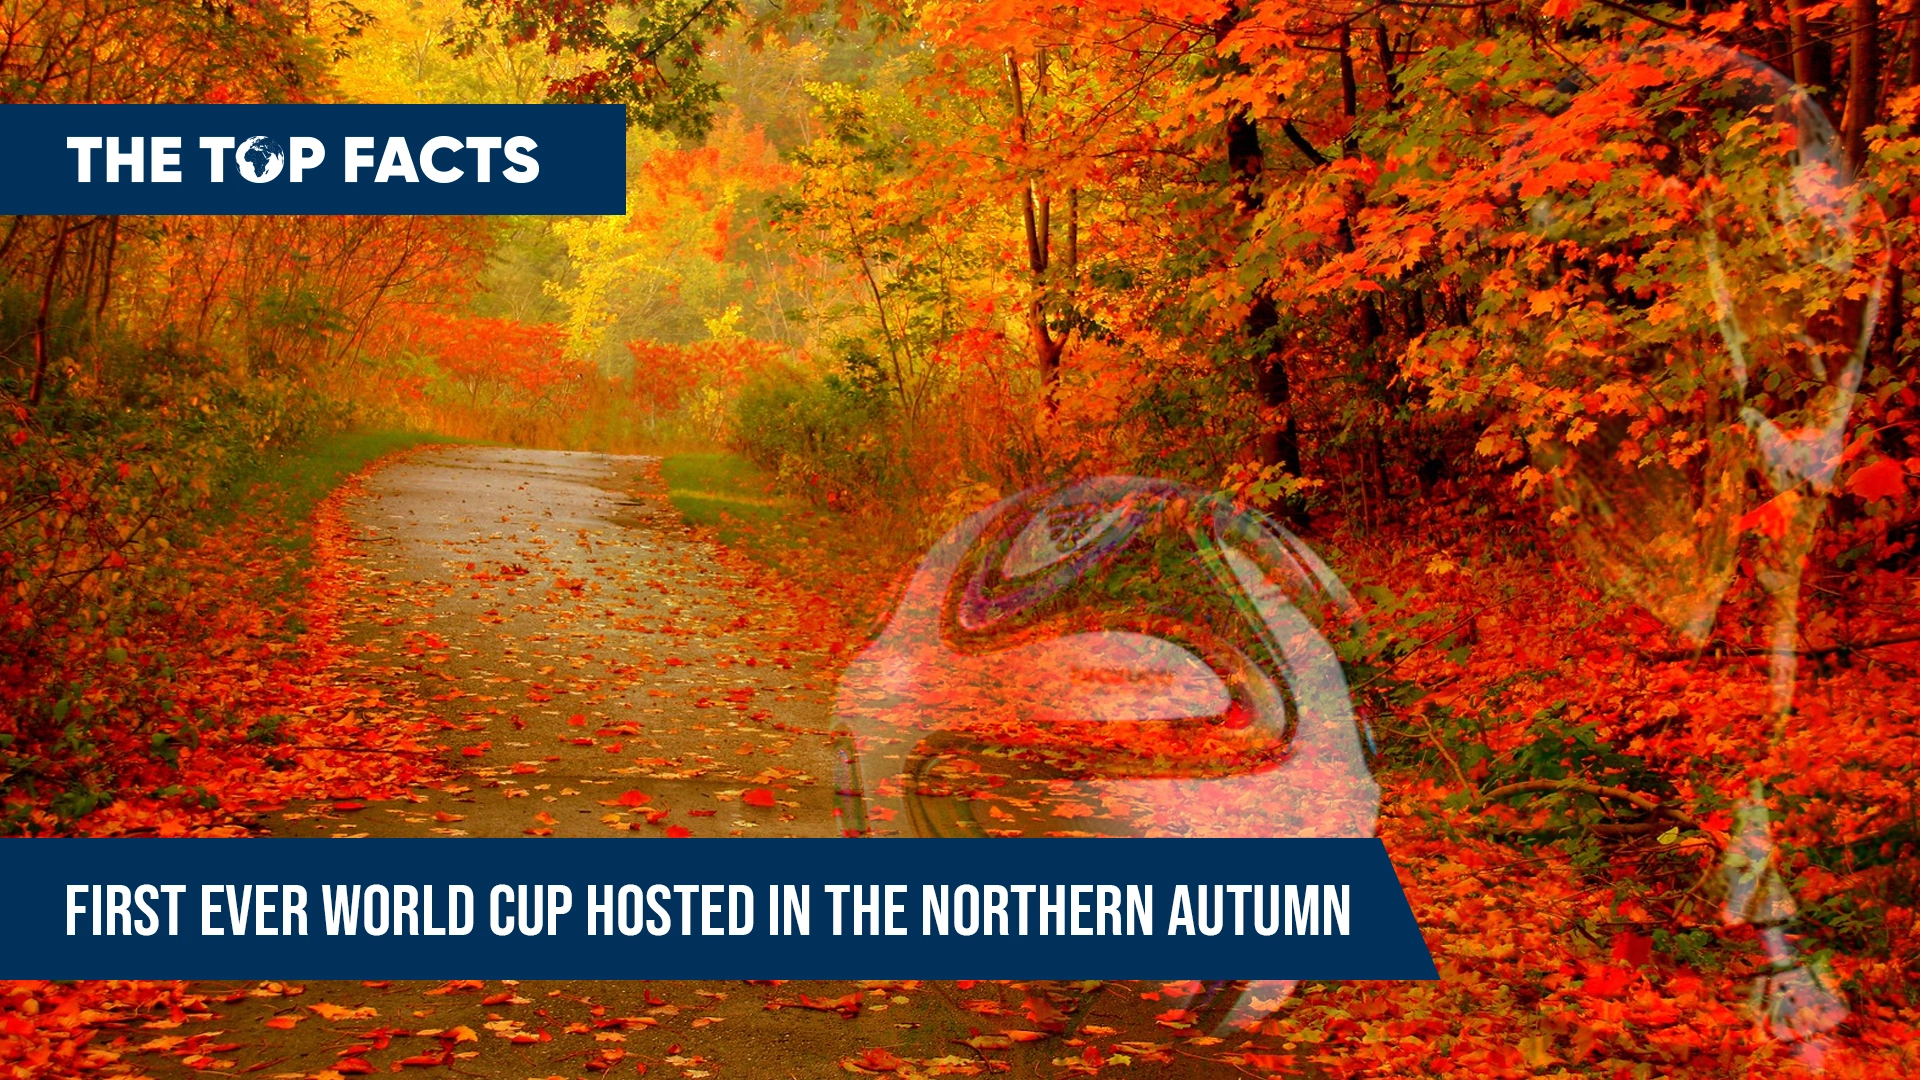 Historic World Cup held during northern hemisphere's fall season - First-ever World Cup hosted in the northern autumn